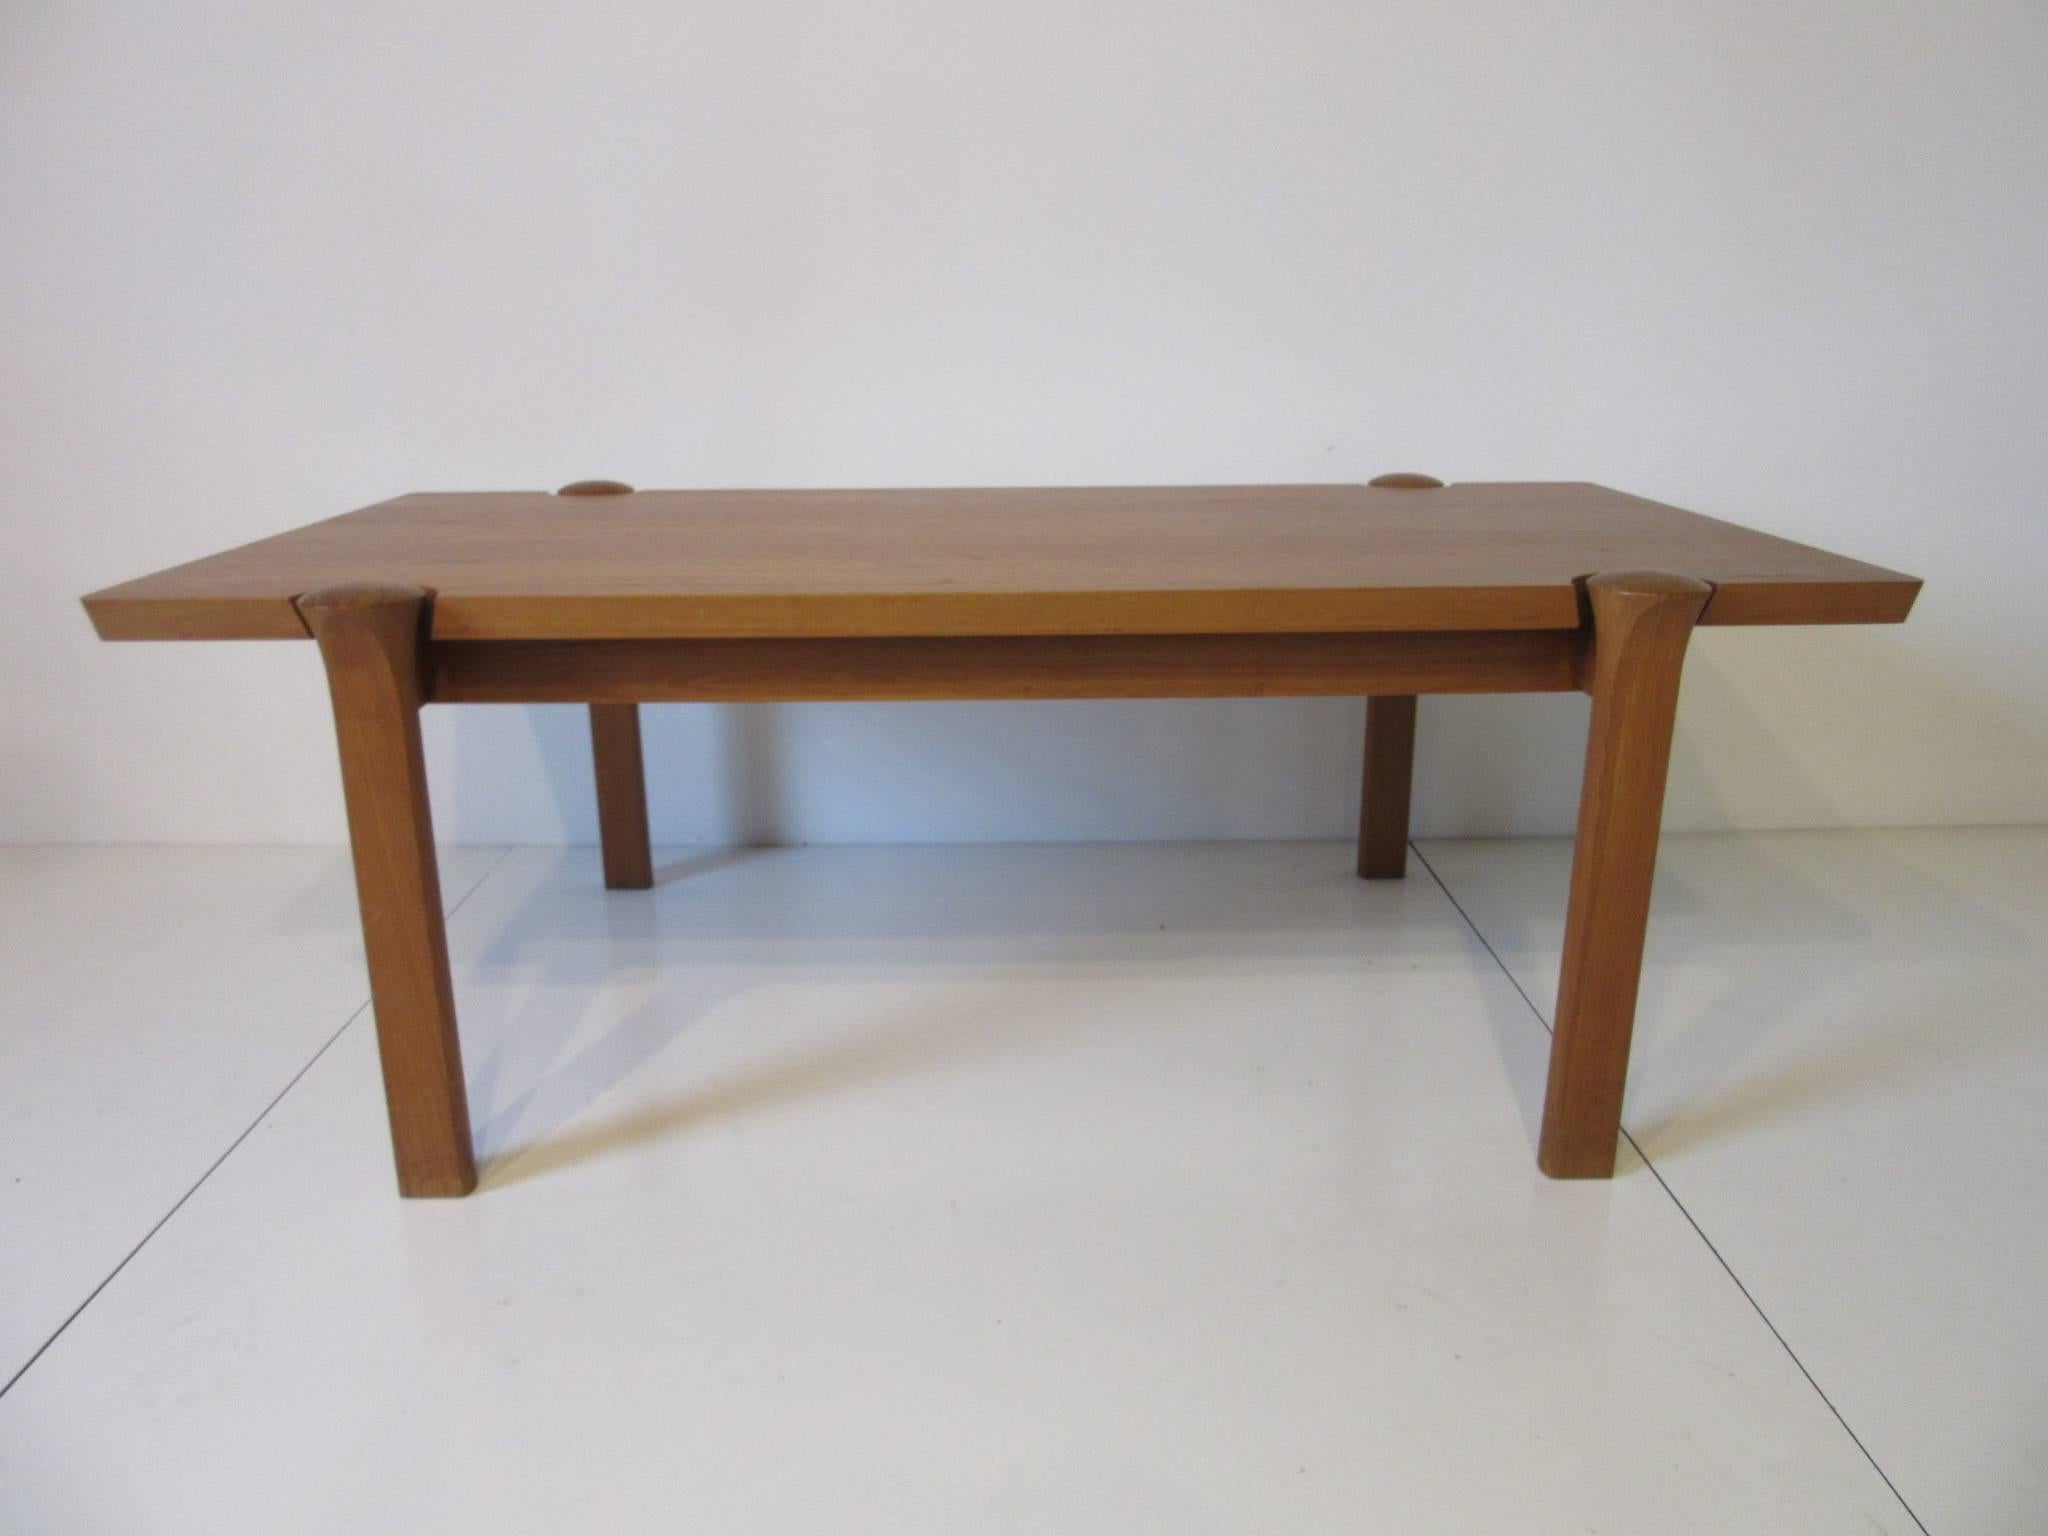 A teak wood Danish coffee table with great graining and surface cutouts exposing the top of the legs, well crafted and heavy, retains the manufactures tag to the bottom side. Manufactured in Denmark by Cado Mobler.